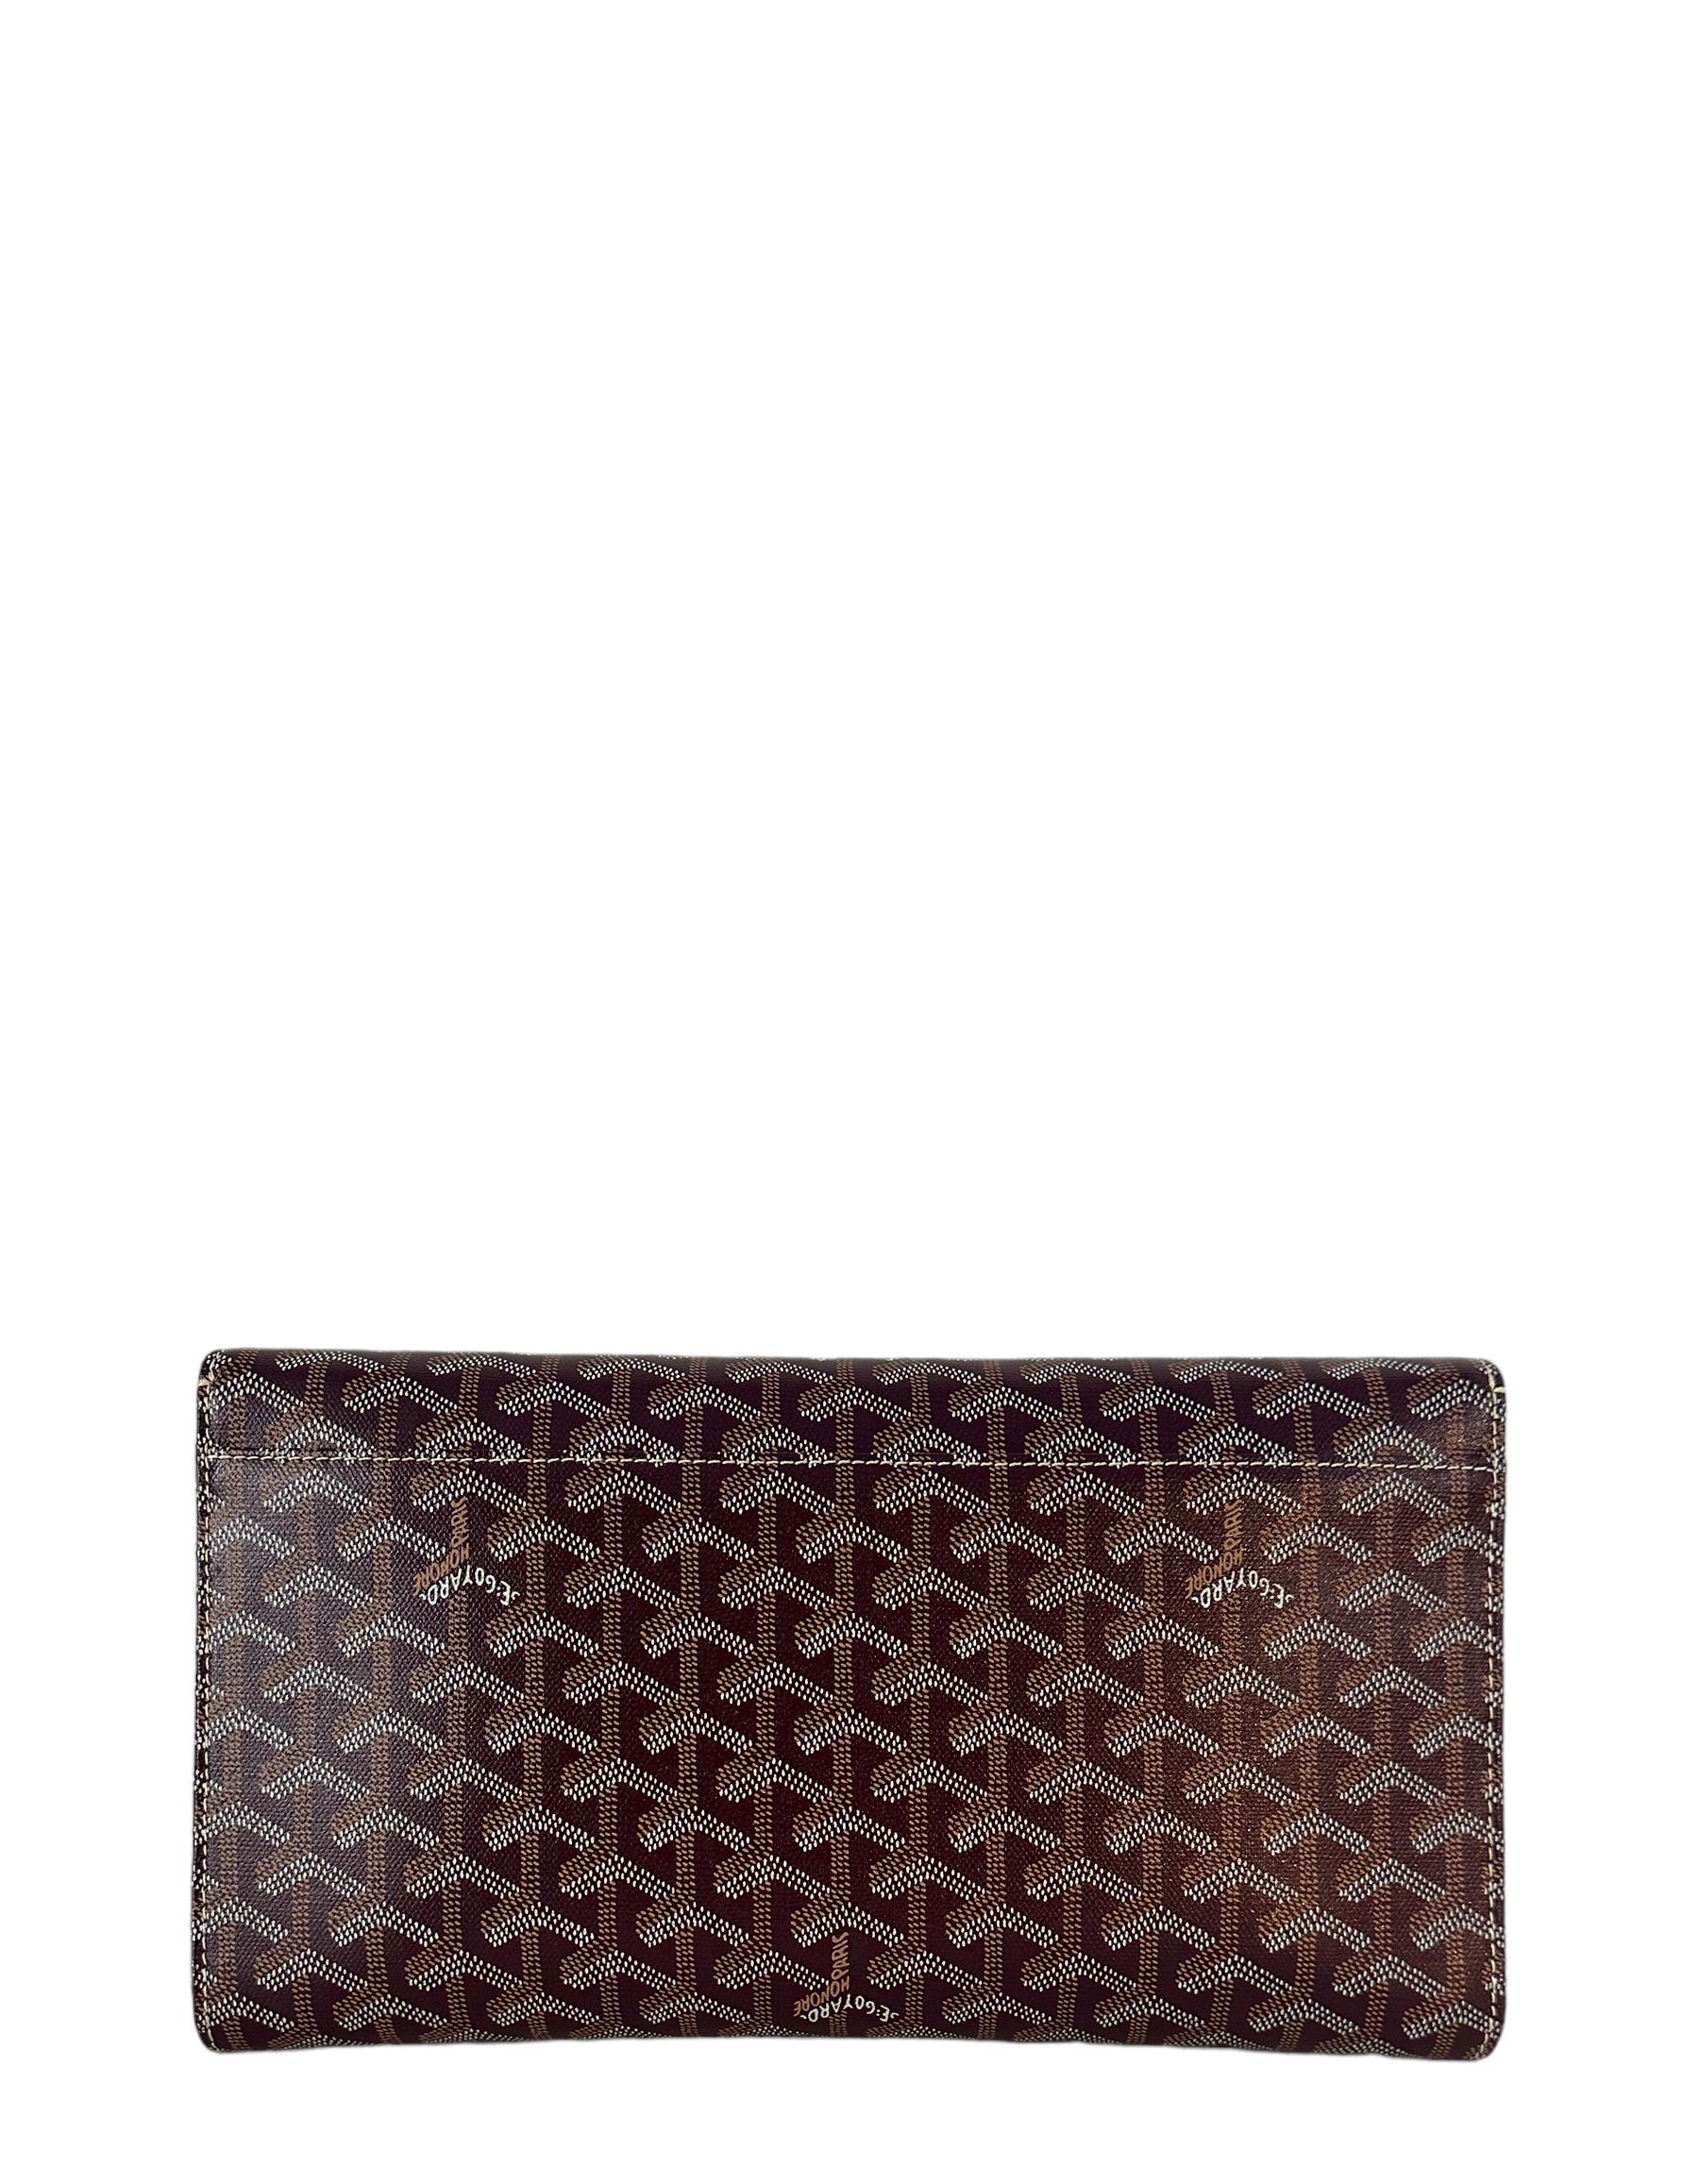 Goyard Burgundy Goyardine Monte Carlo Bois Clutch Bag. Please note, this bag does not include the strap. 

Made In: France
Color: Burgundy
Hardware: Silvertone
Materials: Coated canvas and leather
Lining: Canvas
Closure/Opening: Flap top with snap